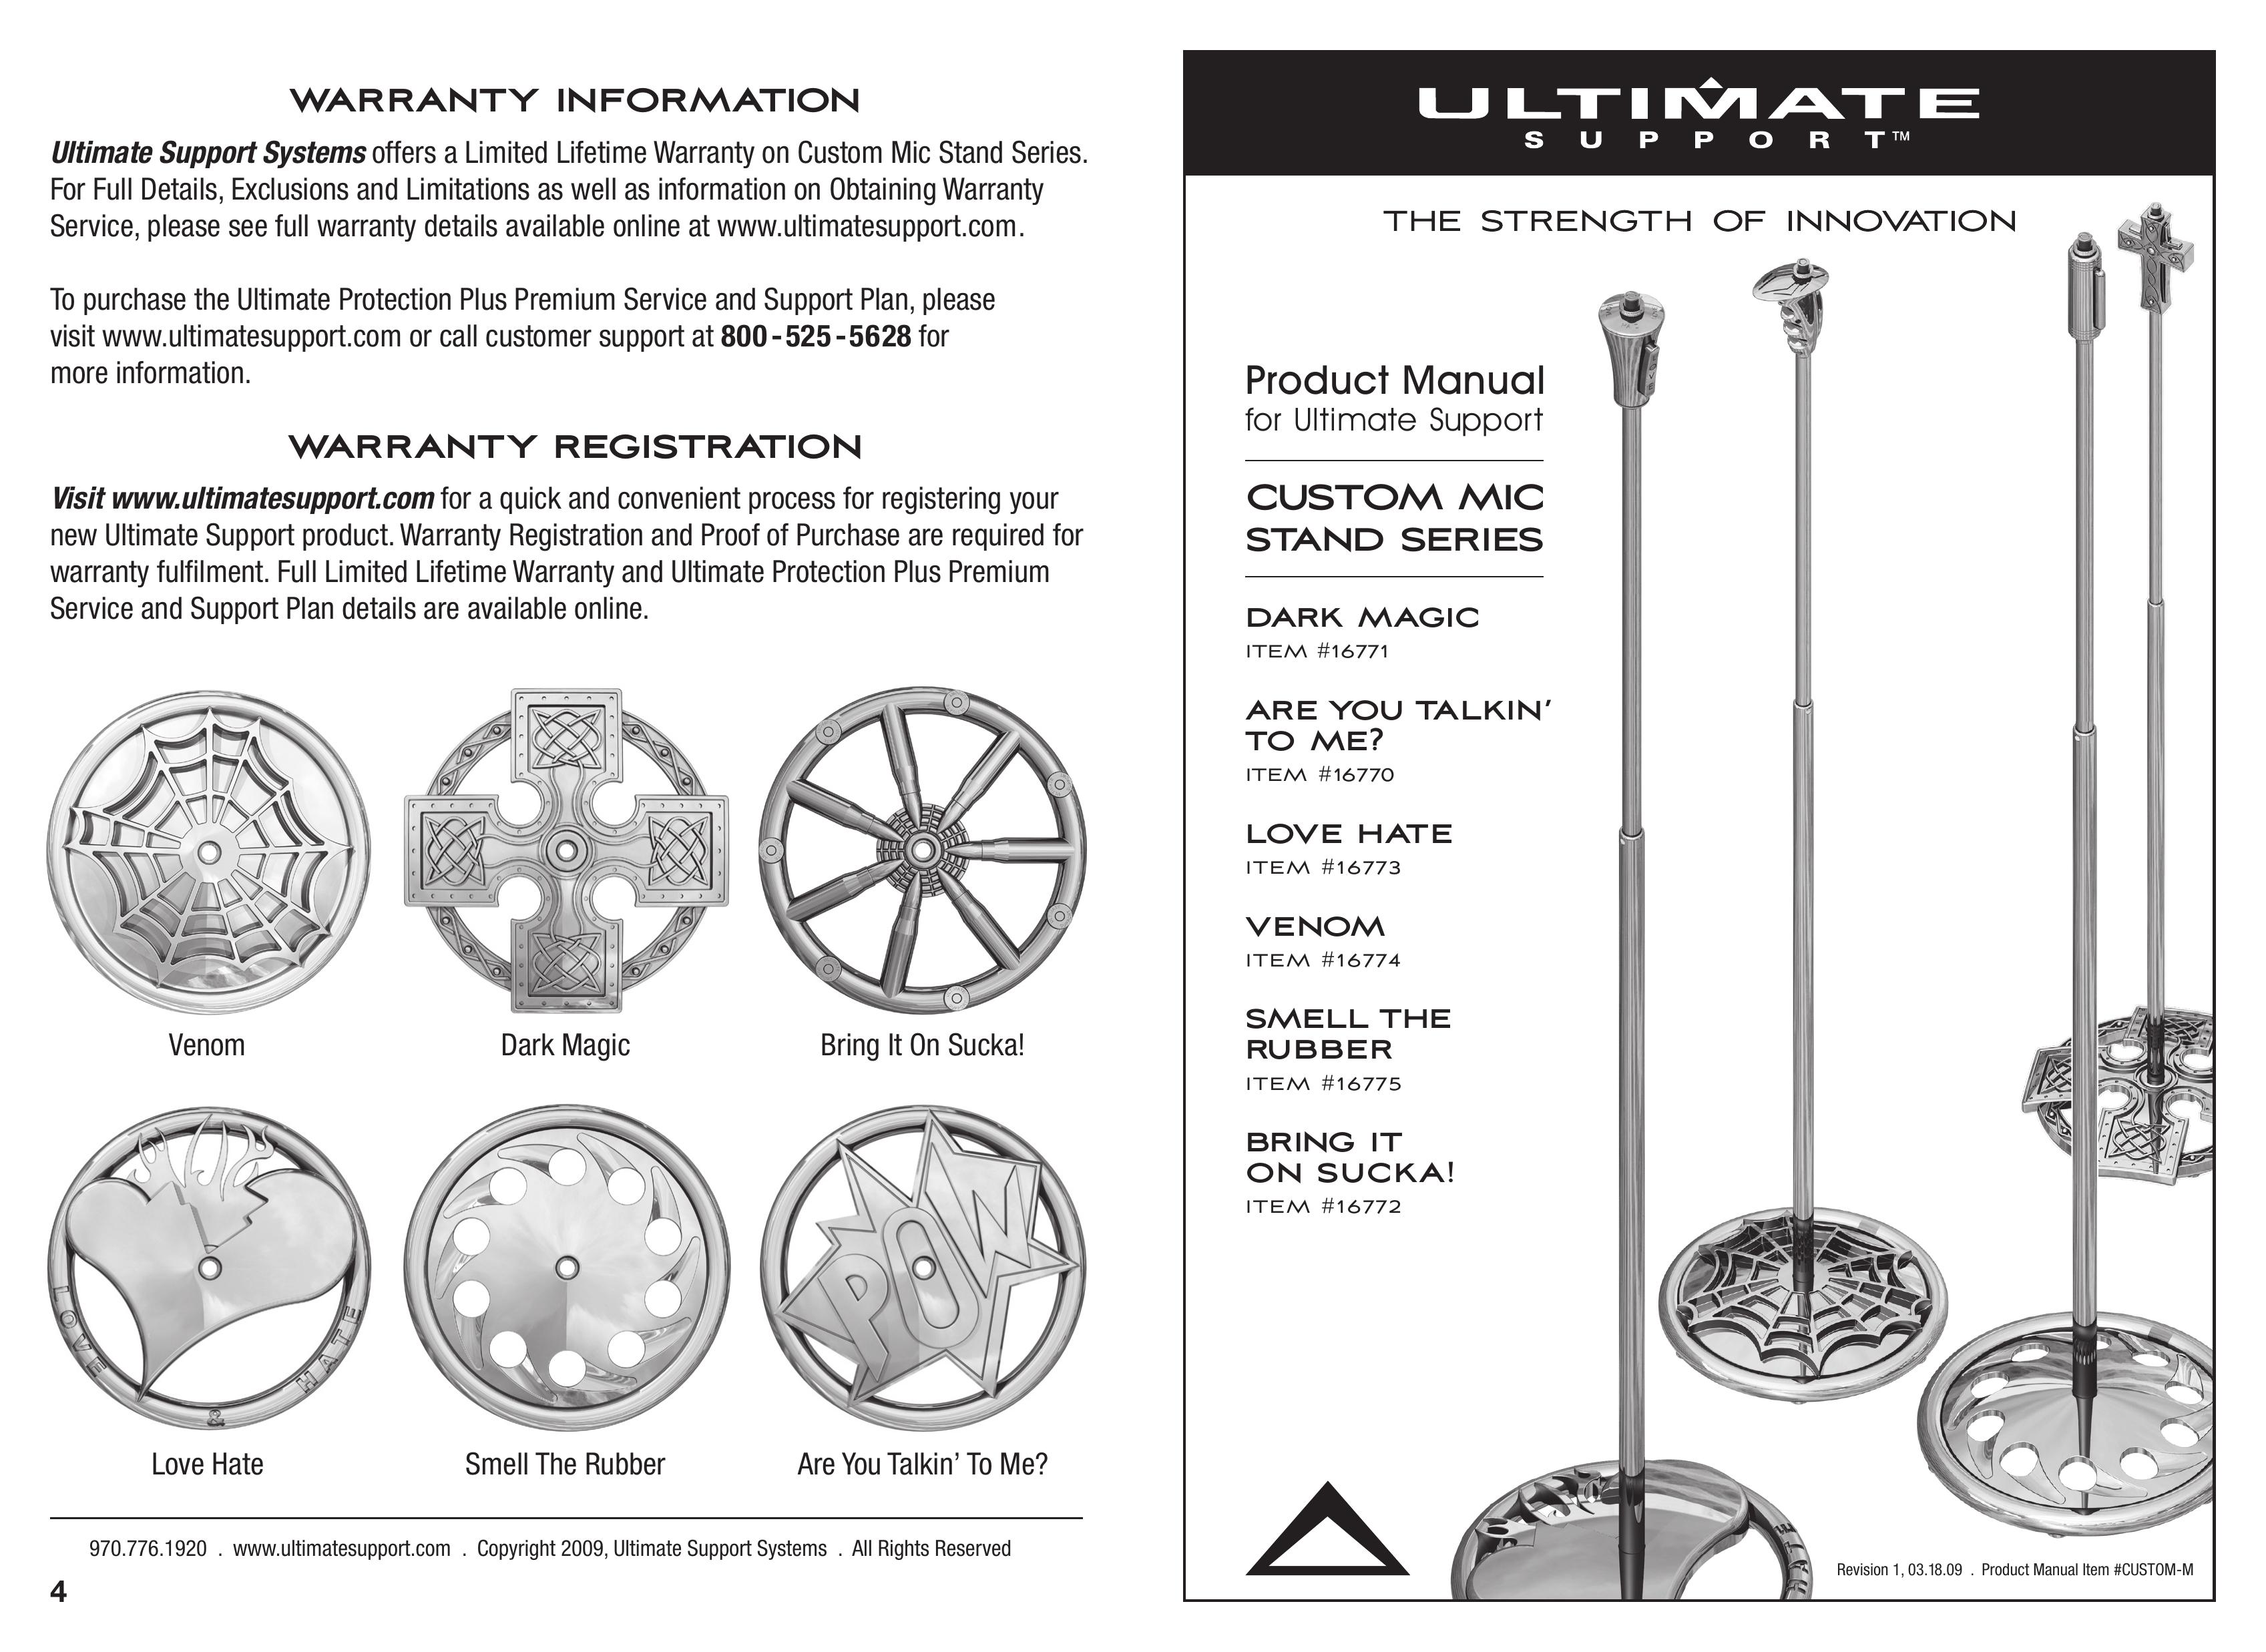 Ultimate Support Systems 16774 Microphone User Manual